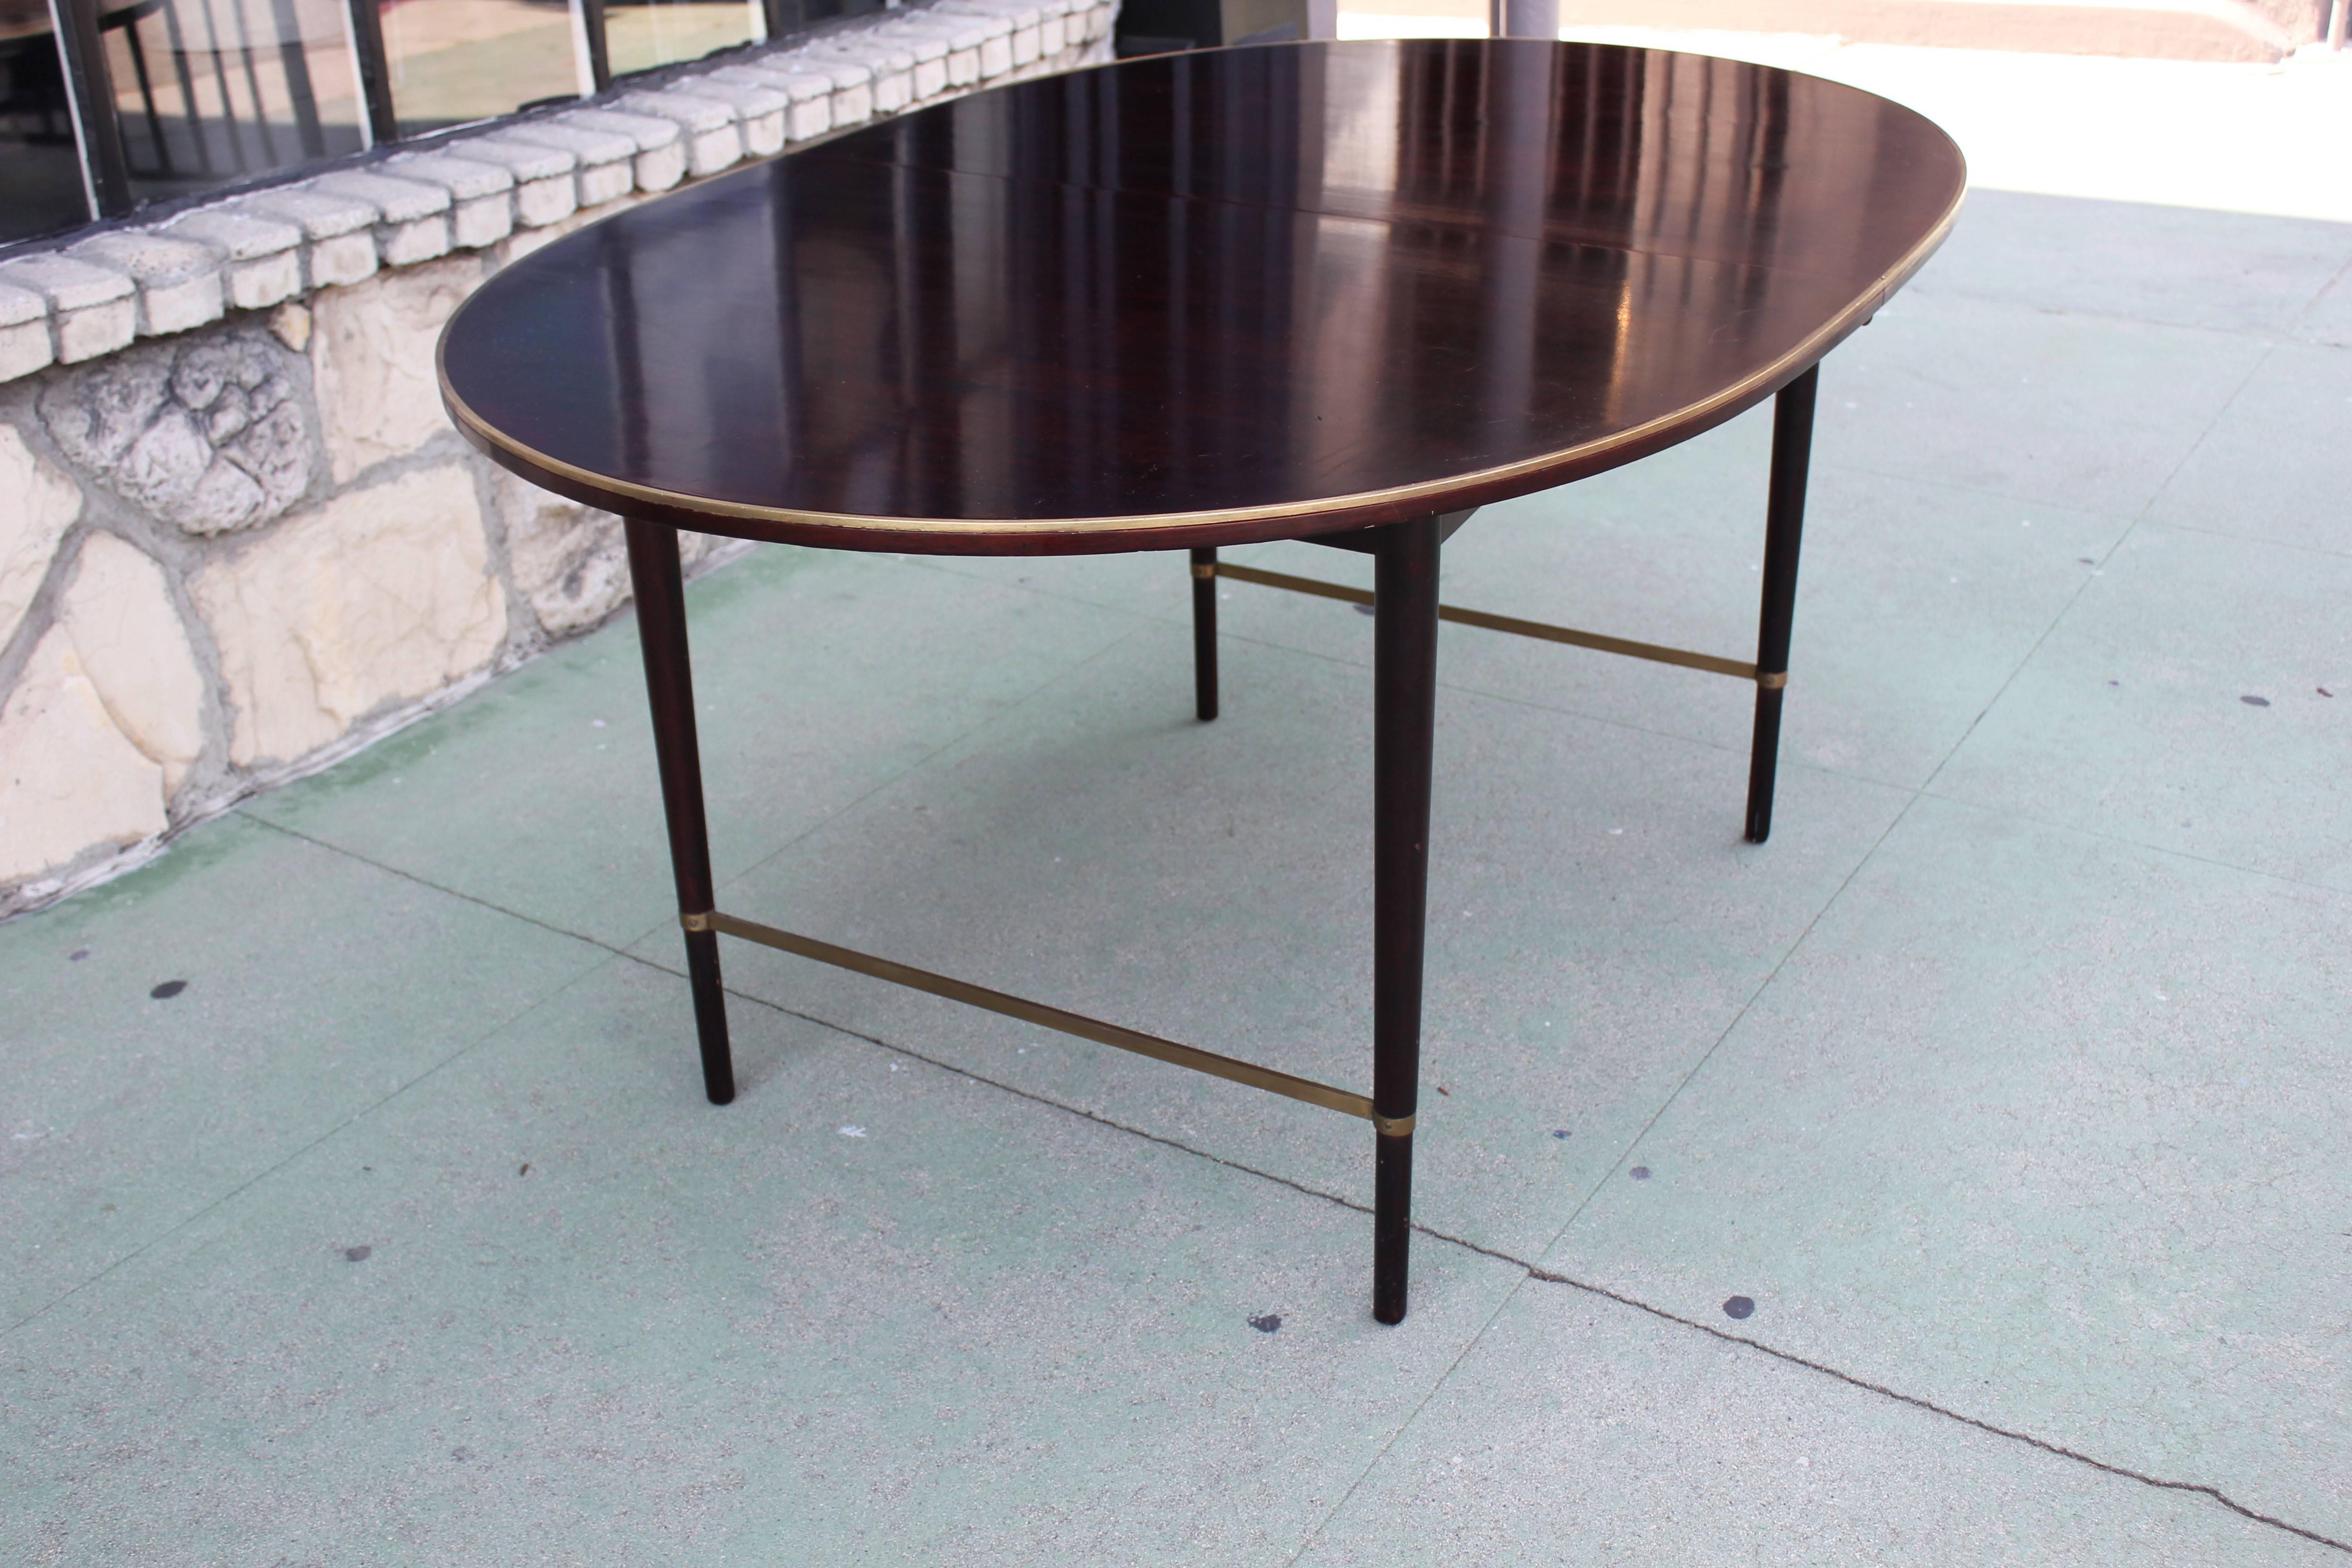 Brass and mahogany Paul McCobb dining table. Refinished. No leaves.